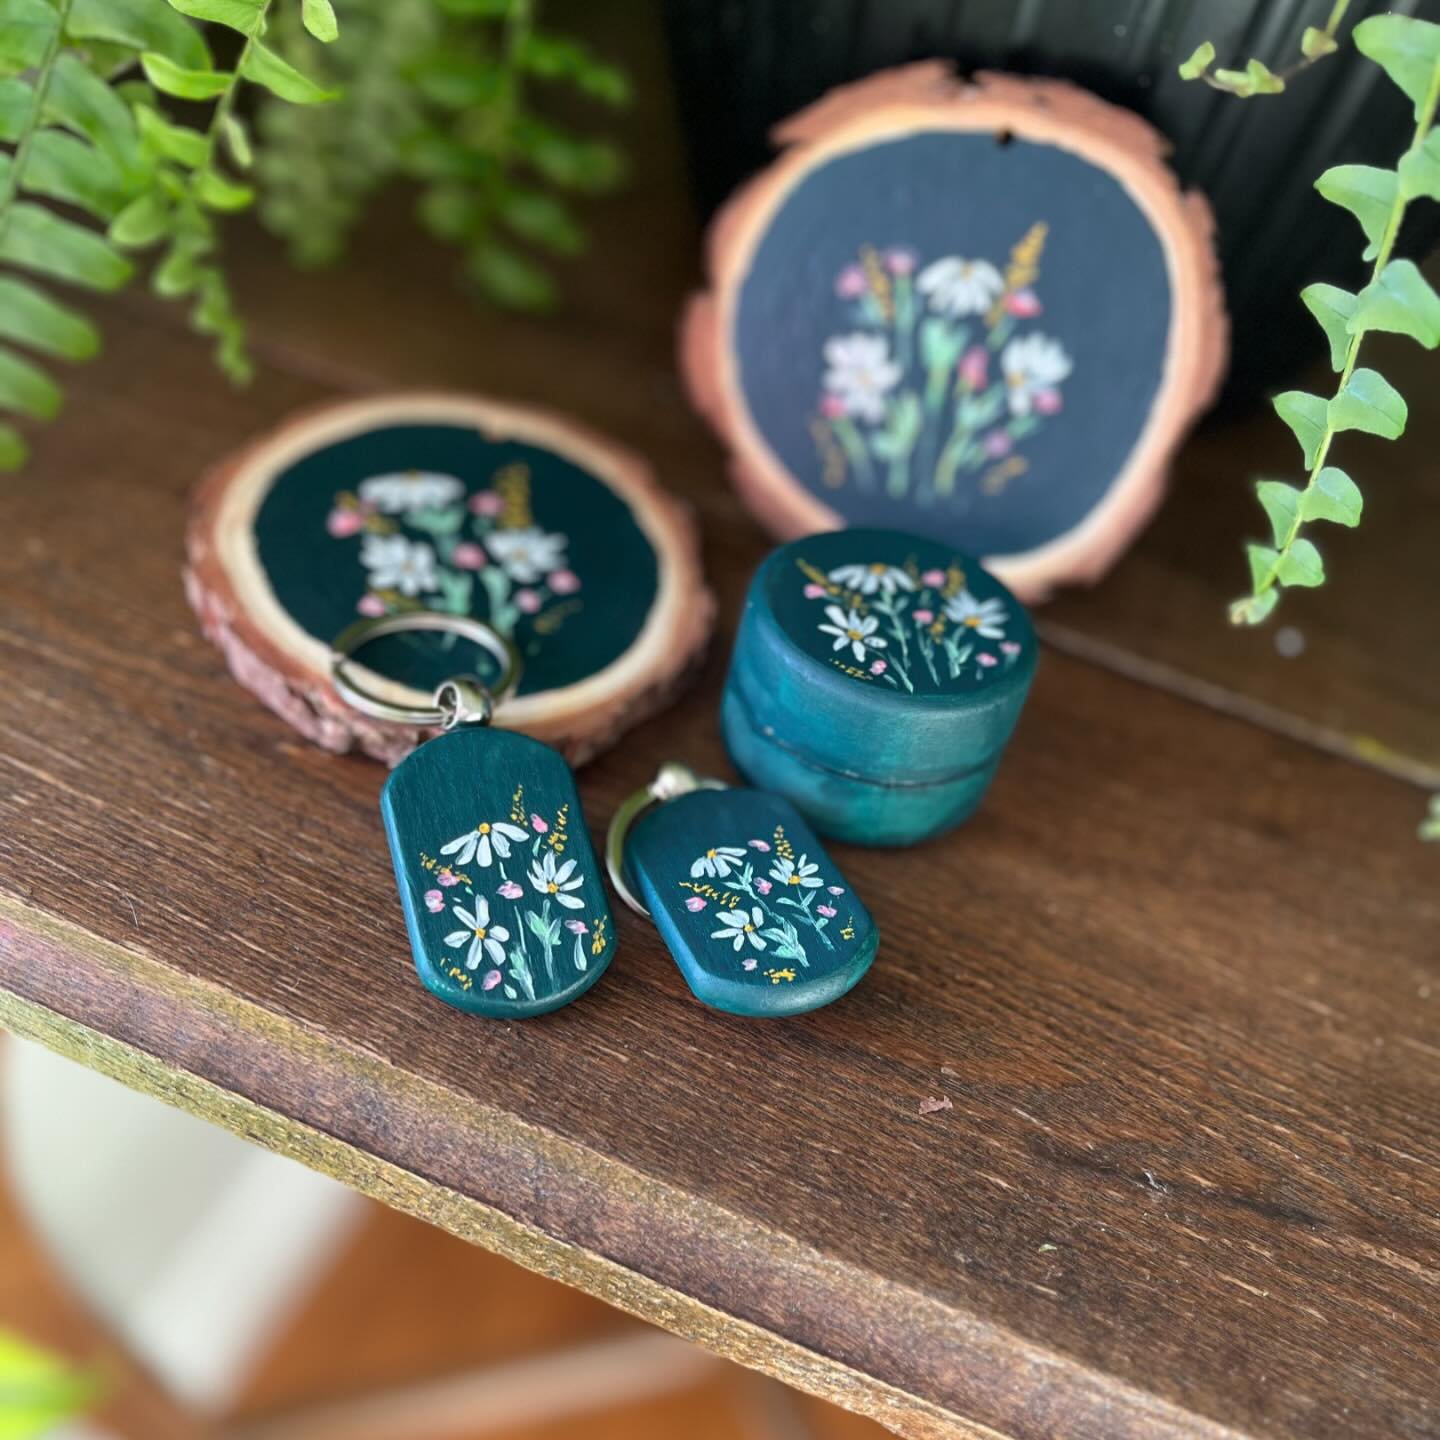 I decided to make a little mini collection based on the one ornament design that I really liked. Now there is an ornament, keychain, and trinket box, all matching. Need to work on more, @makersnorth is only a week and a half away! 😬😬

#FloralPainti